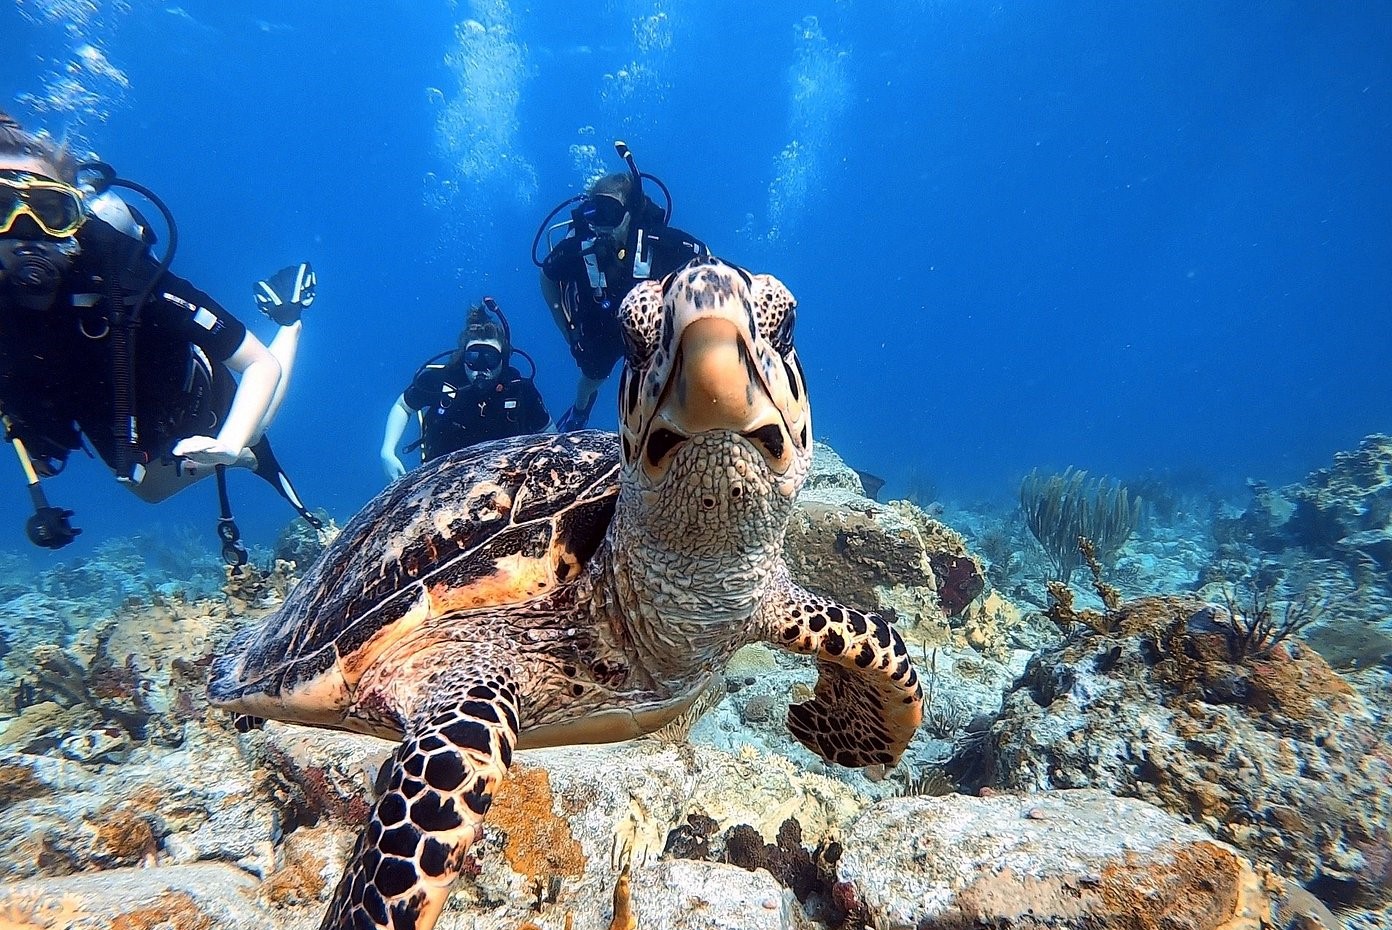 Scuba Diving Packages in St. Thomas